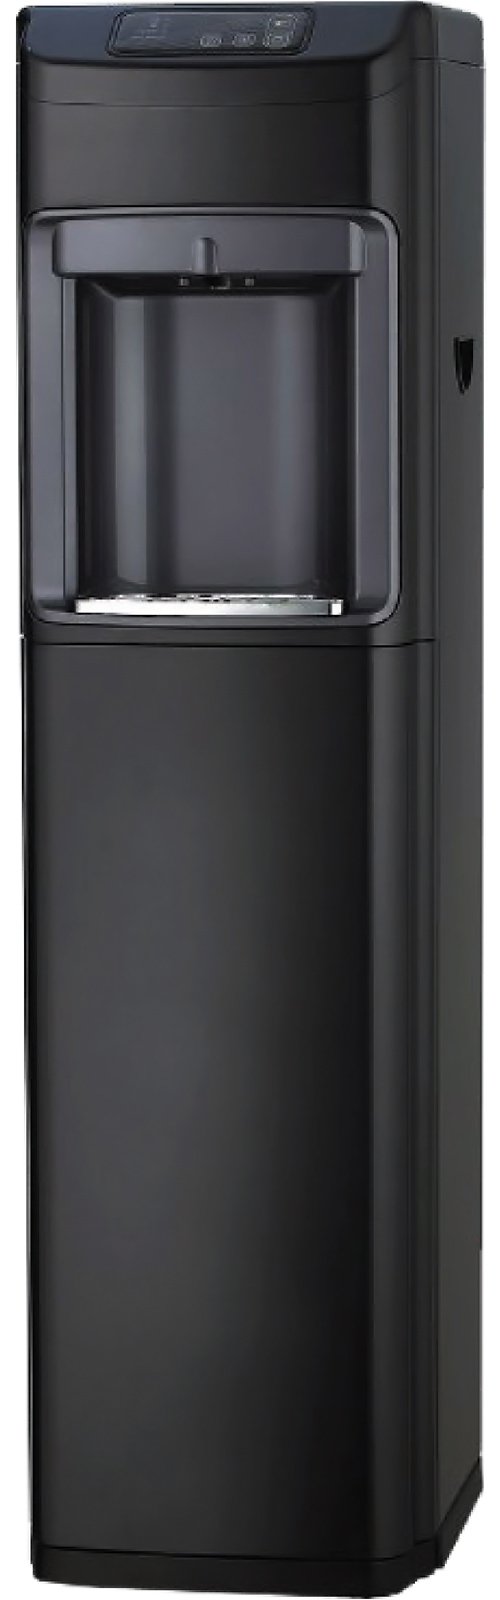 Global G5RO Hot and Cold Bottleless Water Dispenser with Reverse Osmosis Filtration